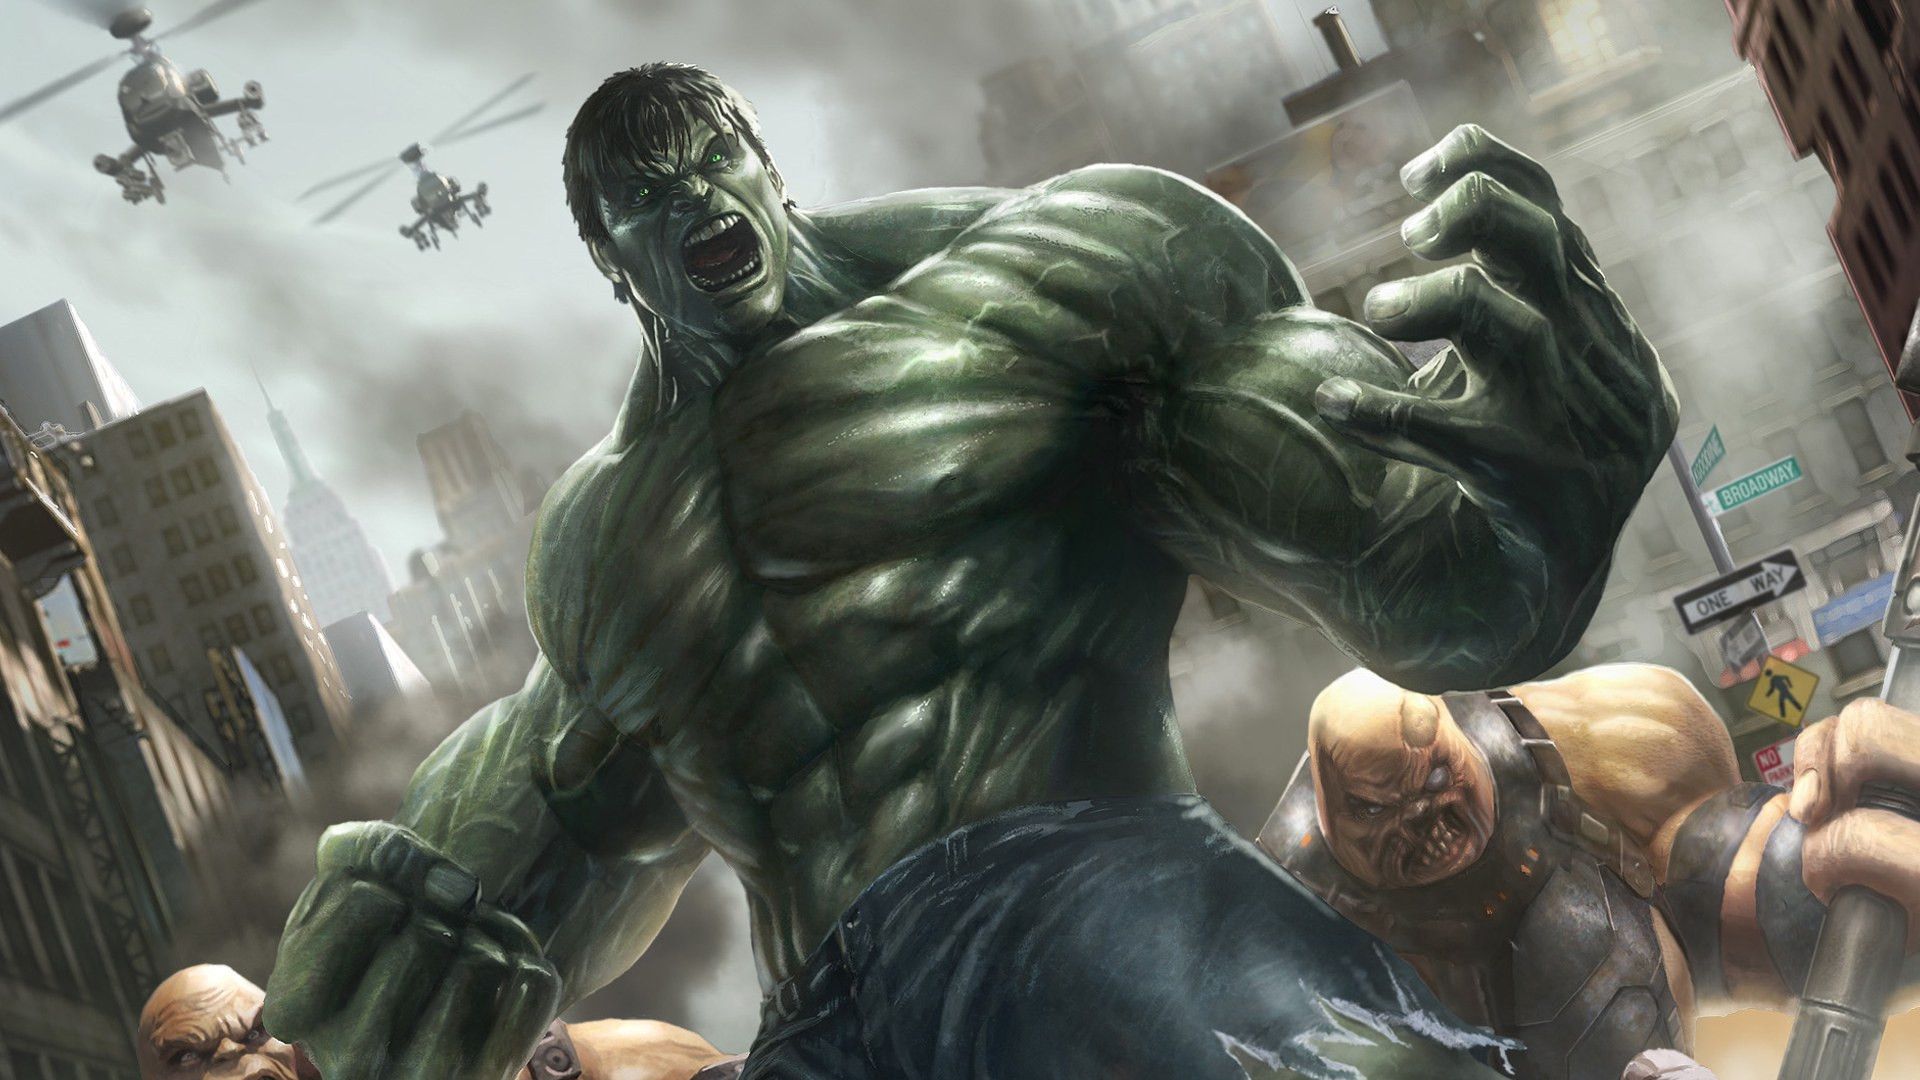  1920x1080 Hulk Hintergrundbild 1920x1080. Mobile wallpaper: Video Game, The Incredible Hulk: Ultimate Destruction, 684434 download the picture for free